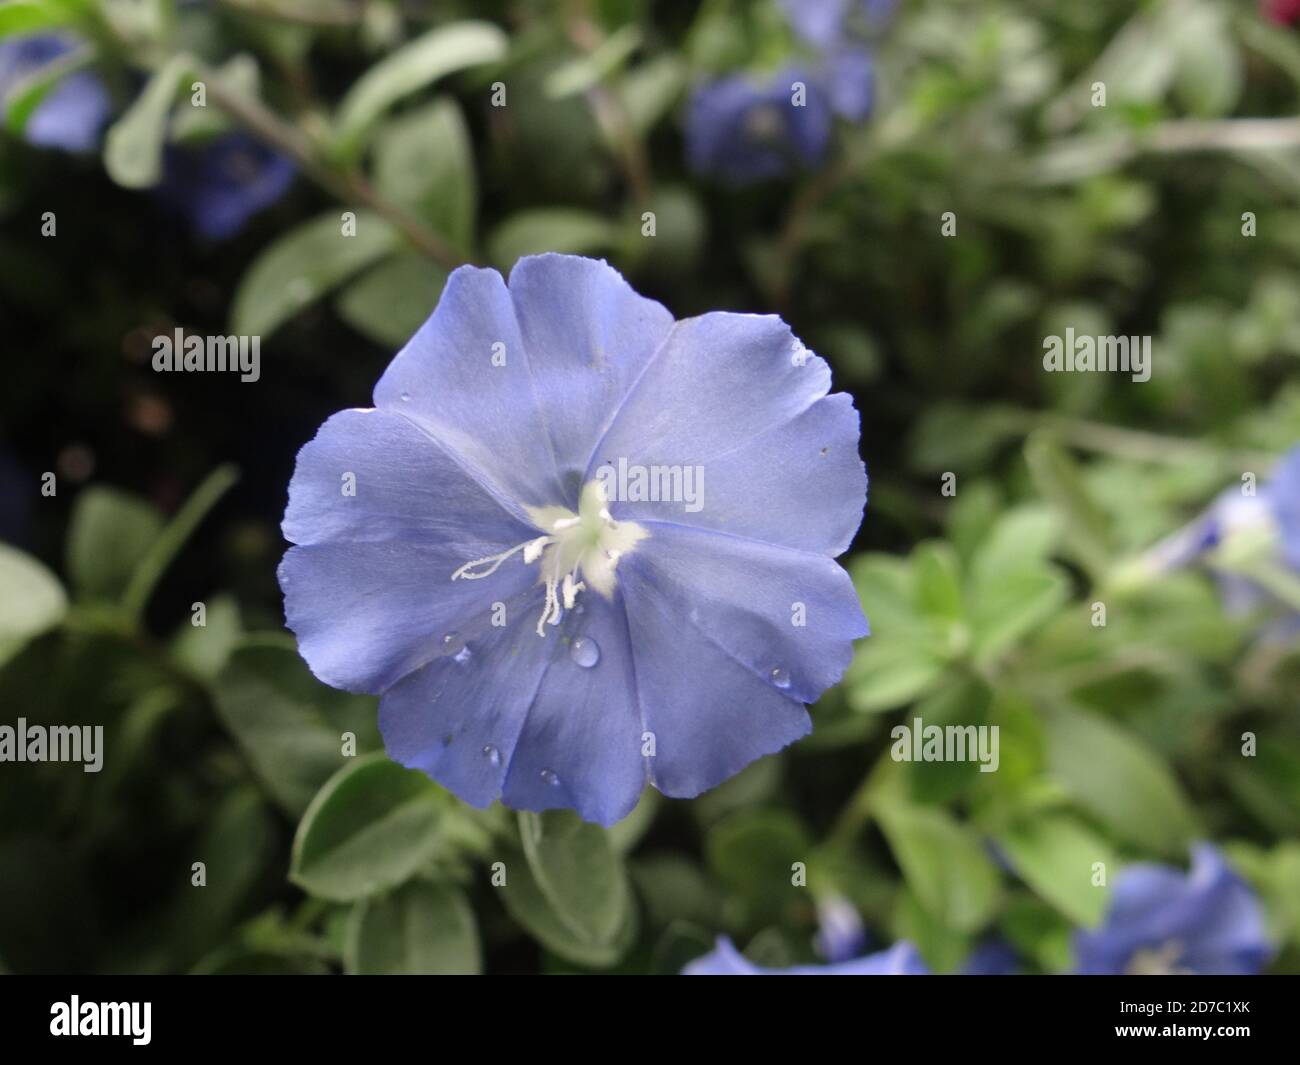 Selective focus shot of blooming Evolvulus flowers in the greenery Stock Photo